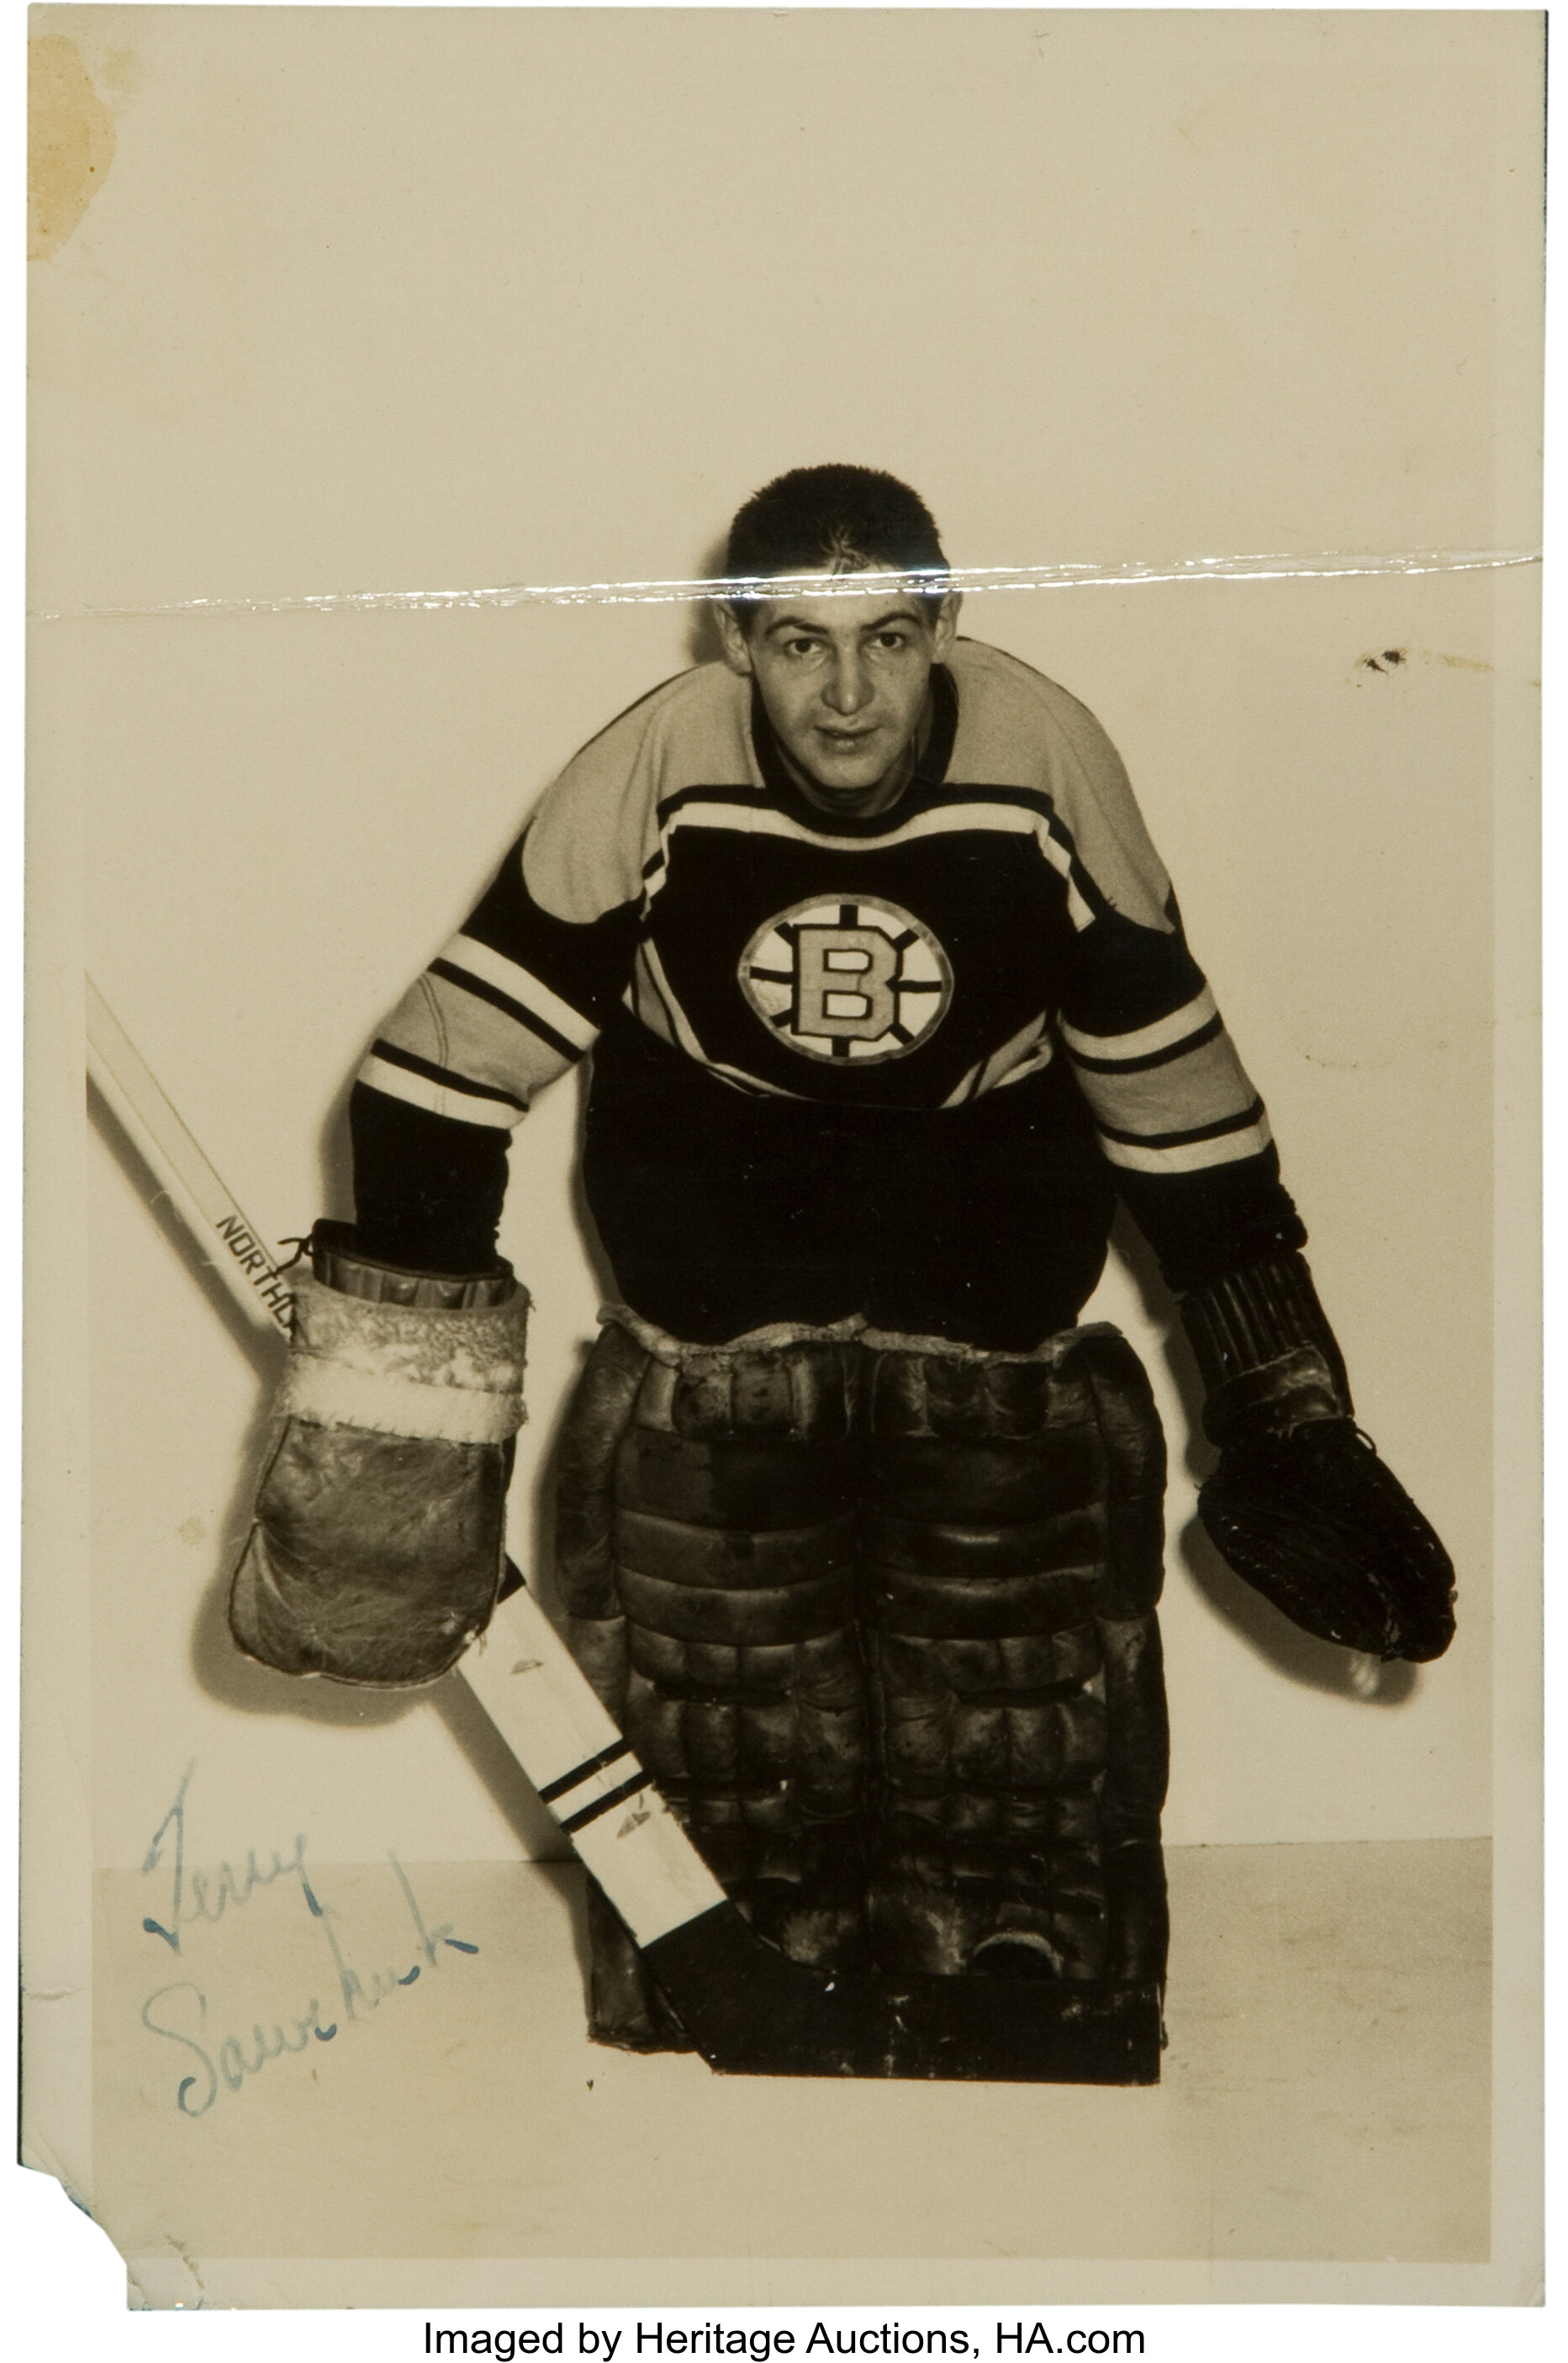 Terry Sawchuk made impression on a young St. John's hockey fan